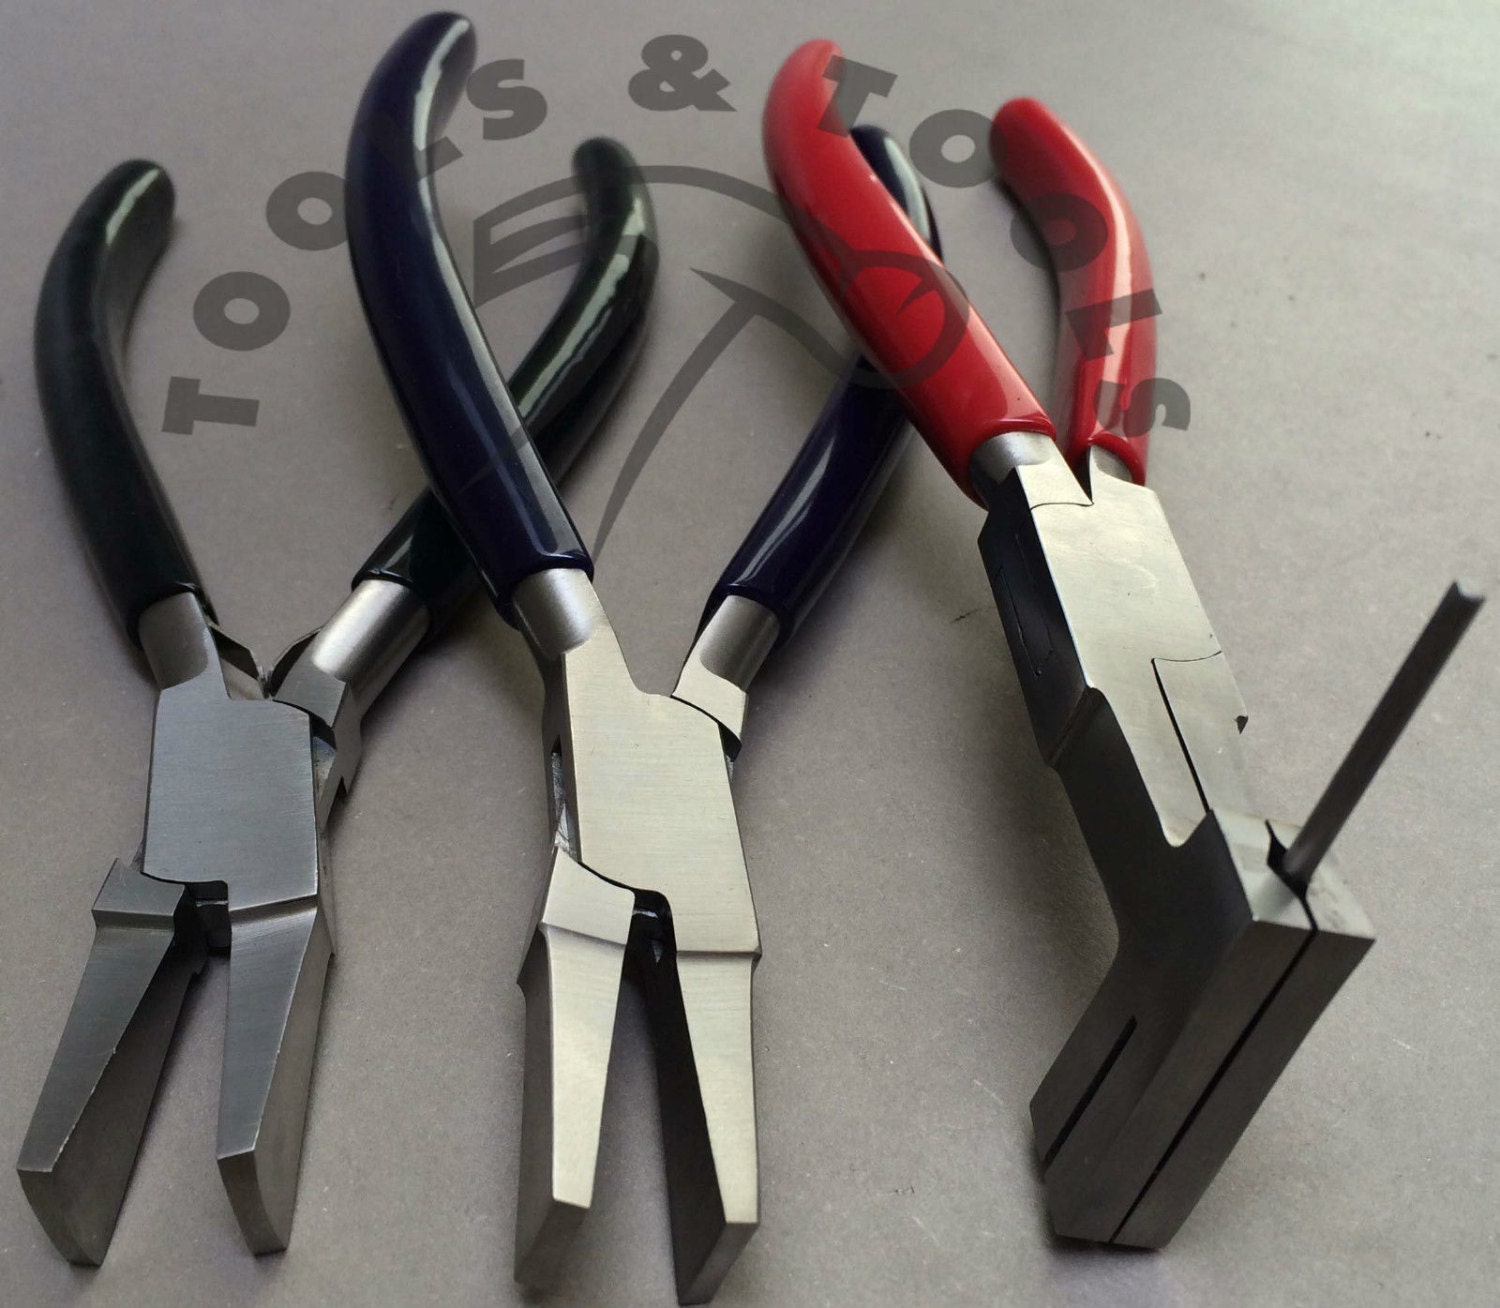 3 Sizes of Circular Nose Wire Winding Pliers for Cutting C-shaped